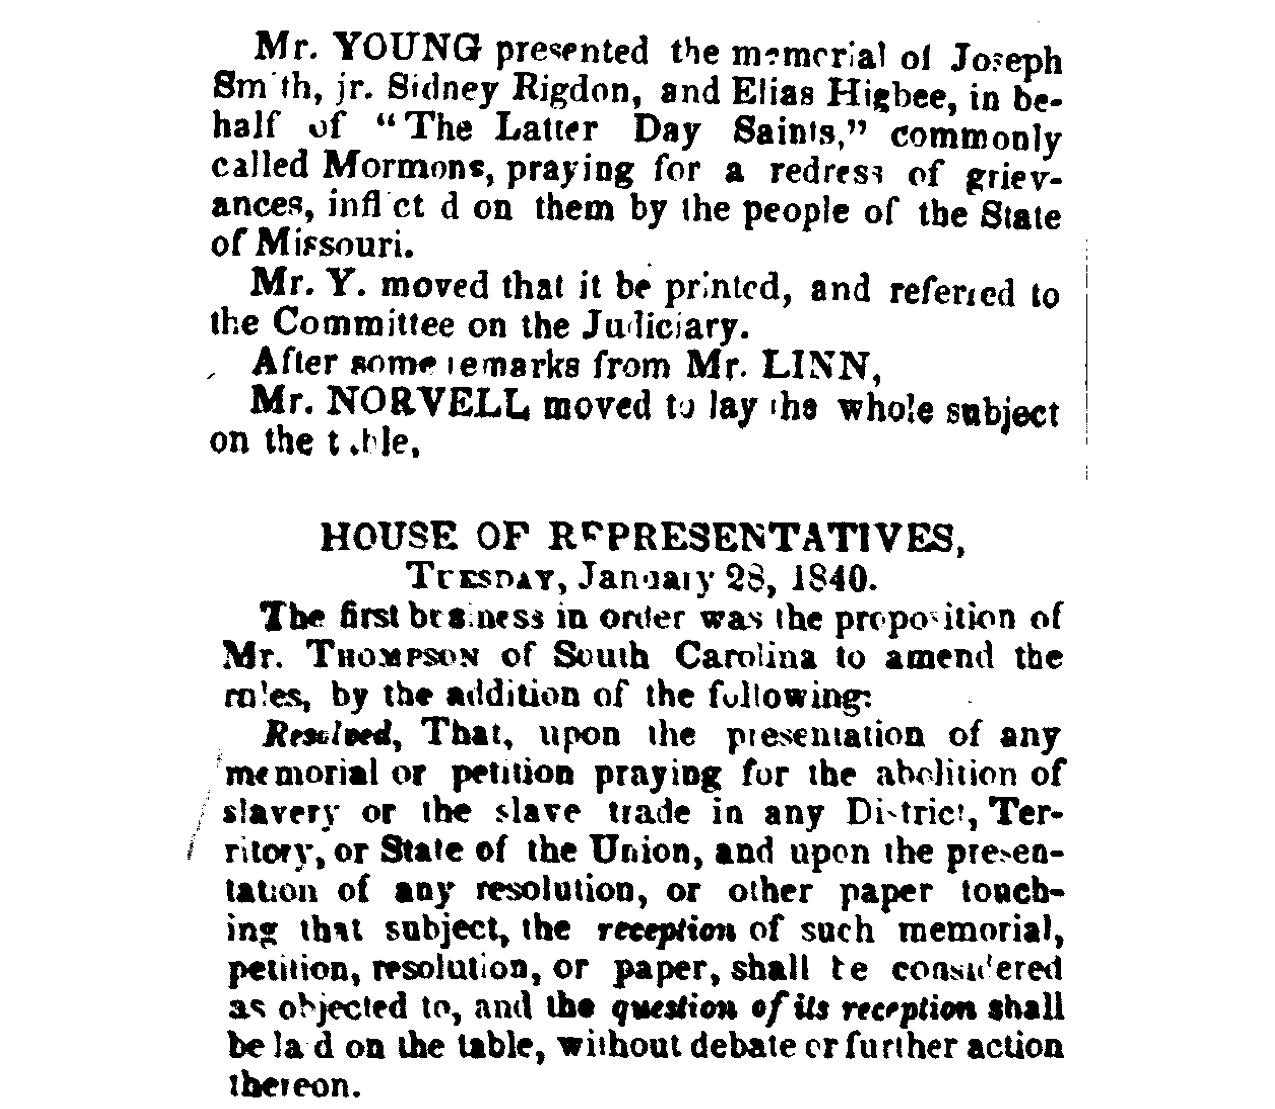 As recorded in the Congressional Globe, Senator Richard Young introduced the Latter-day Saints’ memorial. That same day, the House of Representatives made it even more difficult to consider abolition petitions. Congressional Globe, 28 January 1840, 149, 150. Library of Congress.